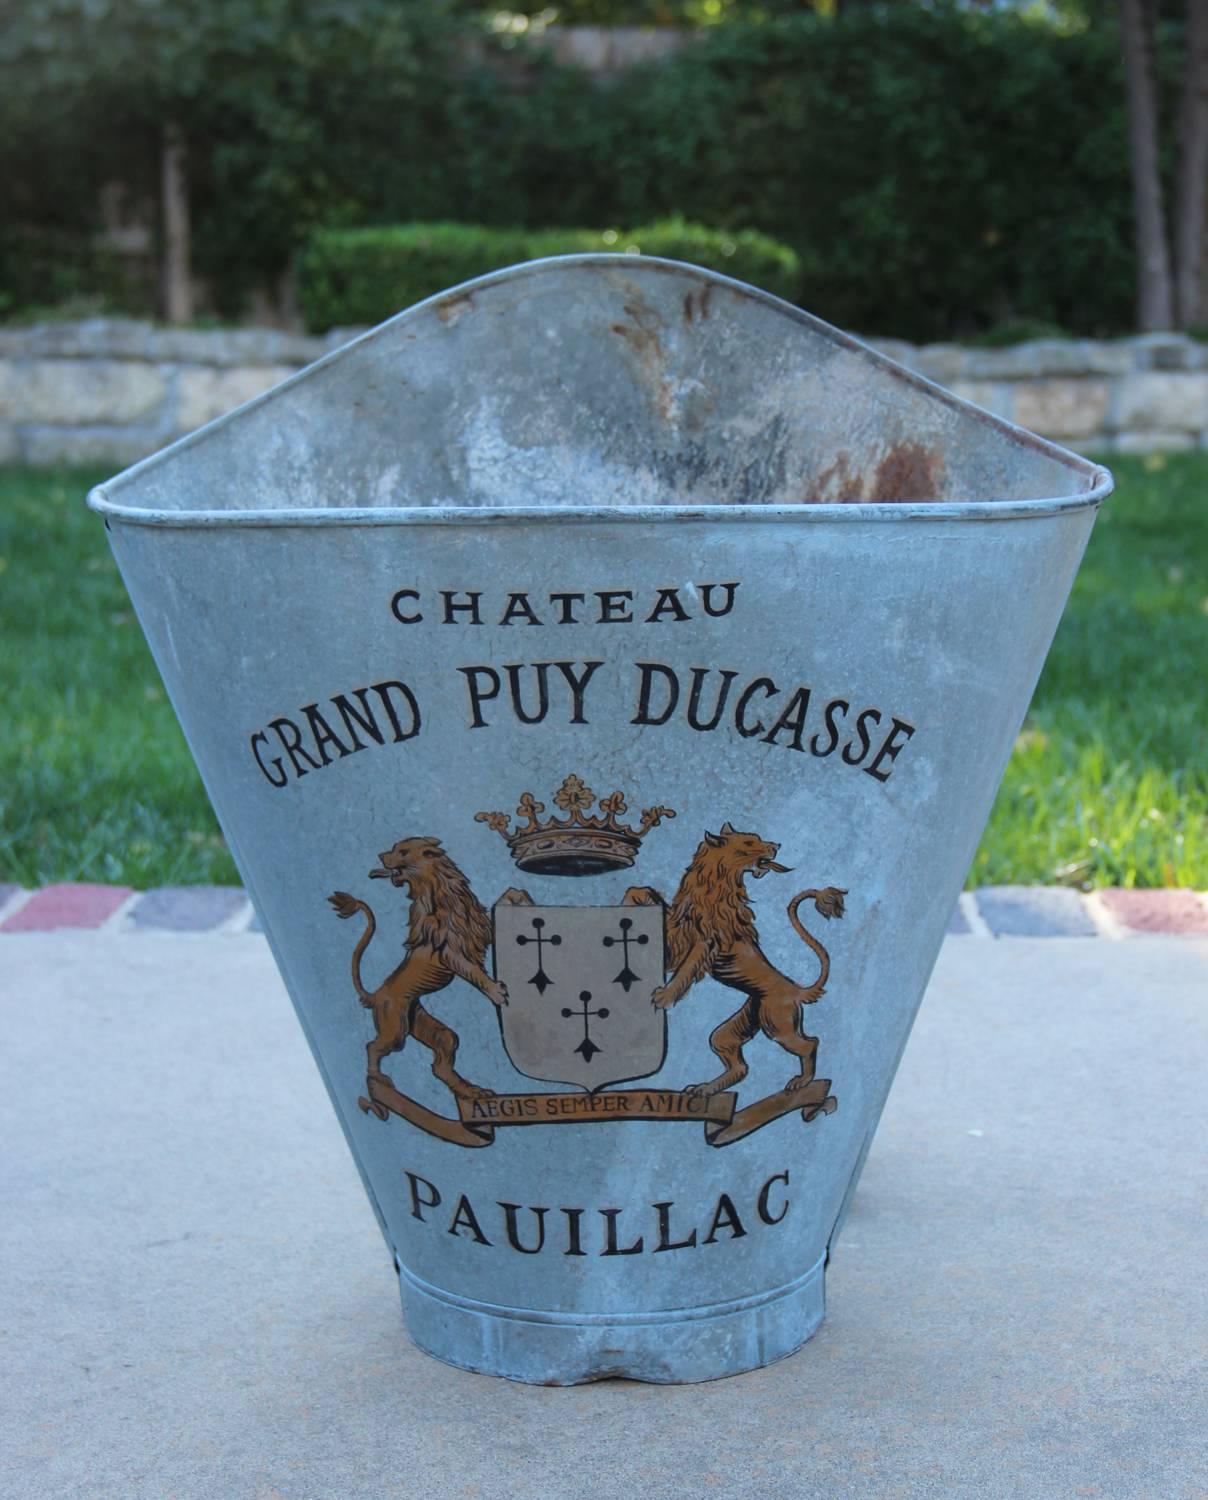 Late 19th century French zinc grape hods with leather back straps. These beautiful French grape hods were once used to collect grapes. This hod features the famous Château Grand-Puy-Ducasse vineyard cote of arms from the Bordeaux region of